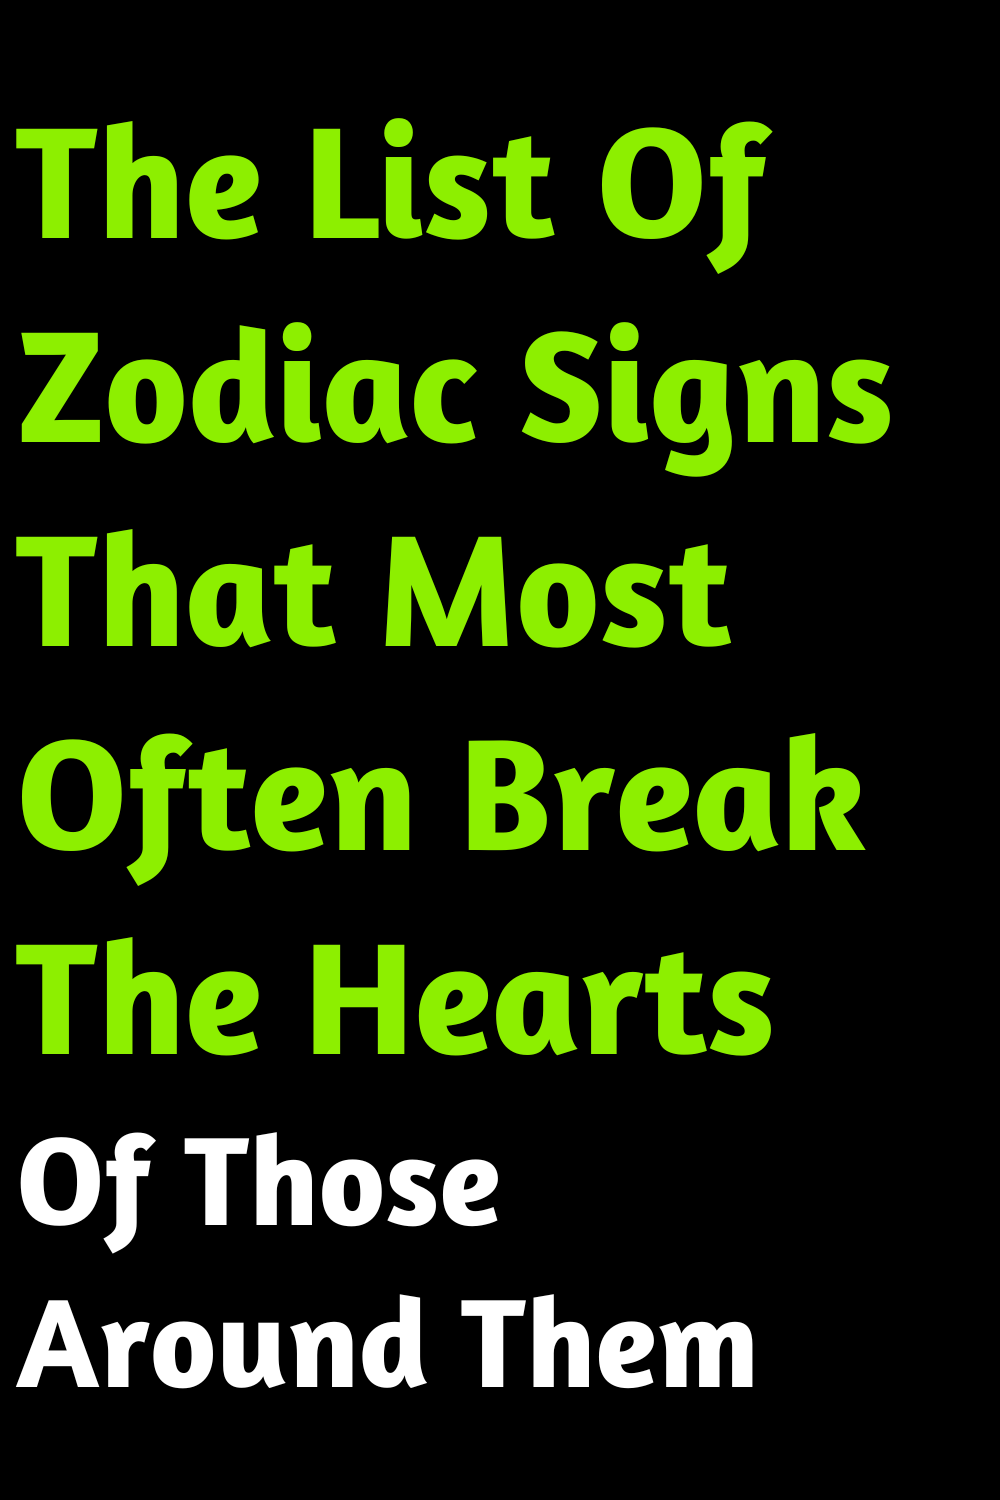 The List Of Zodiac Signs That Most Often Break The Hearts Of Those Around Them